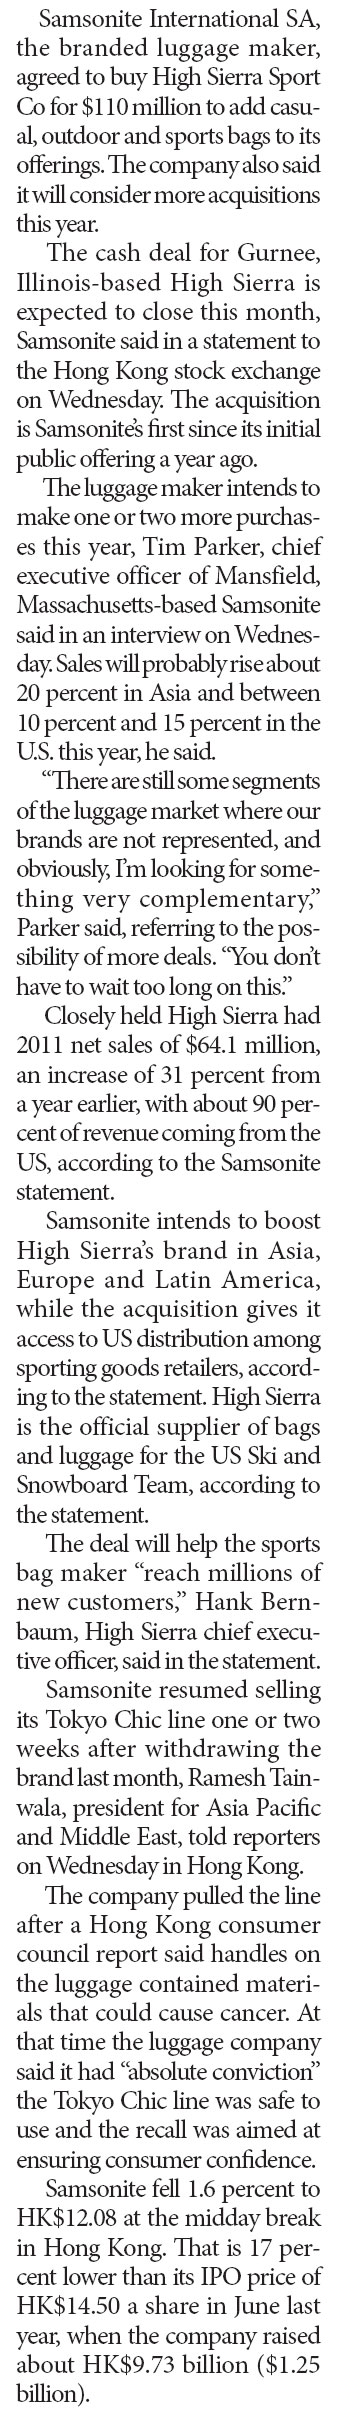 Samsonite to purchase top luggage producer